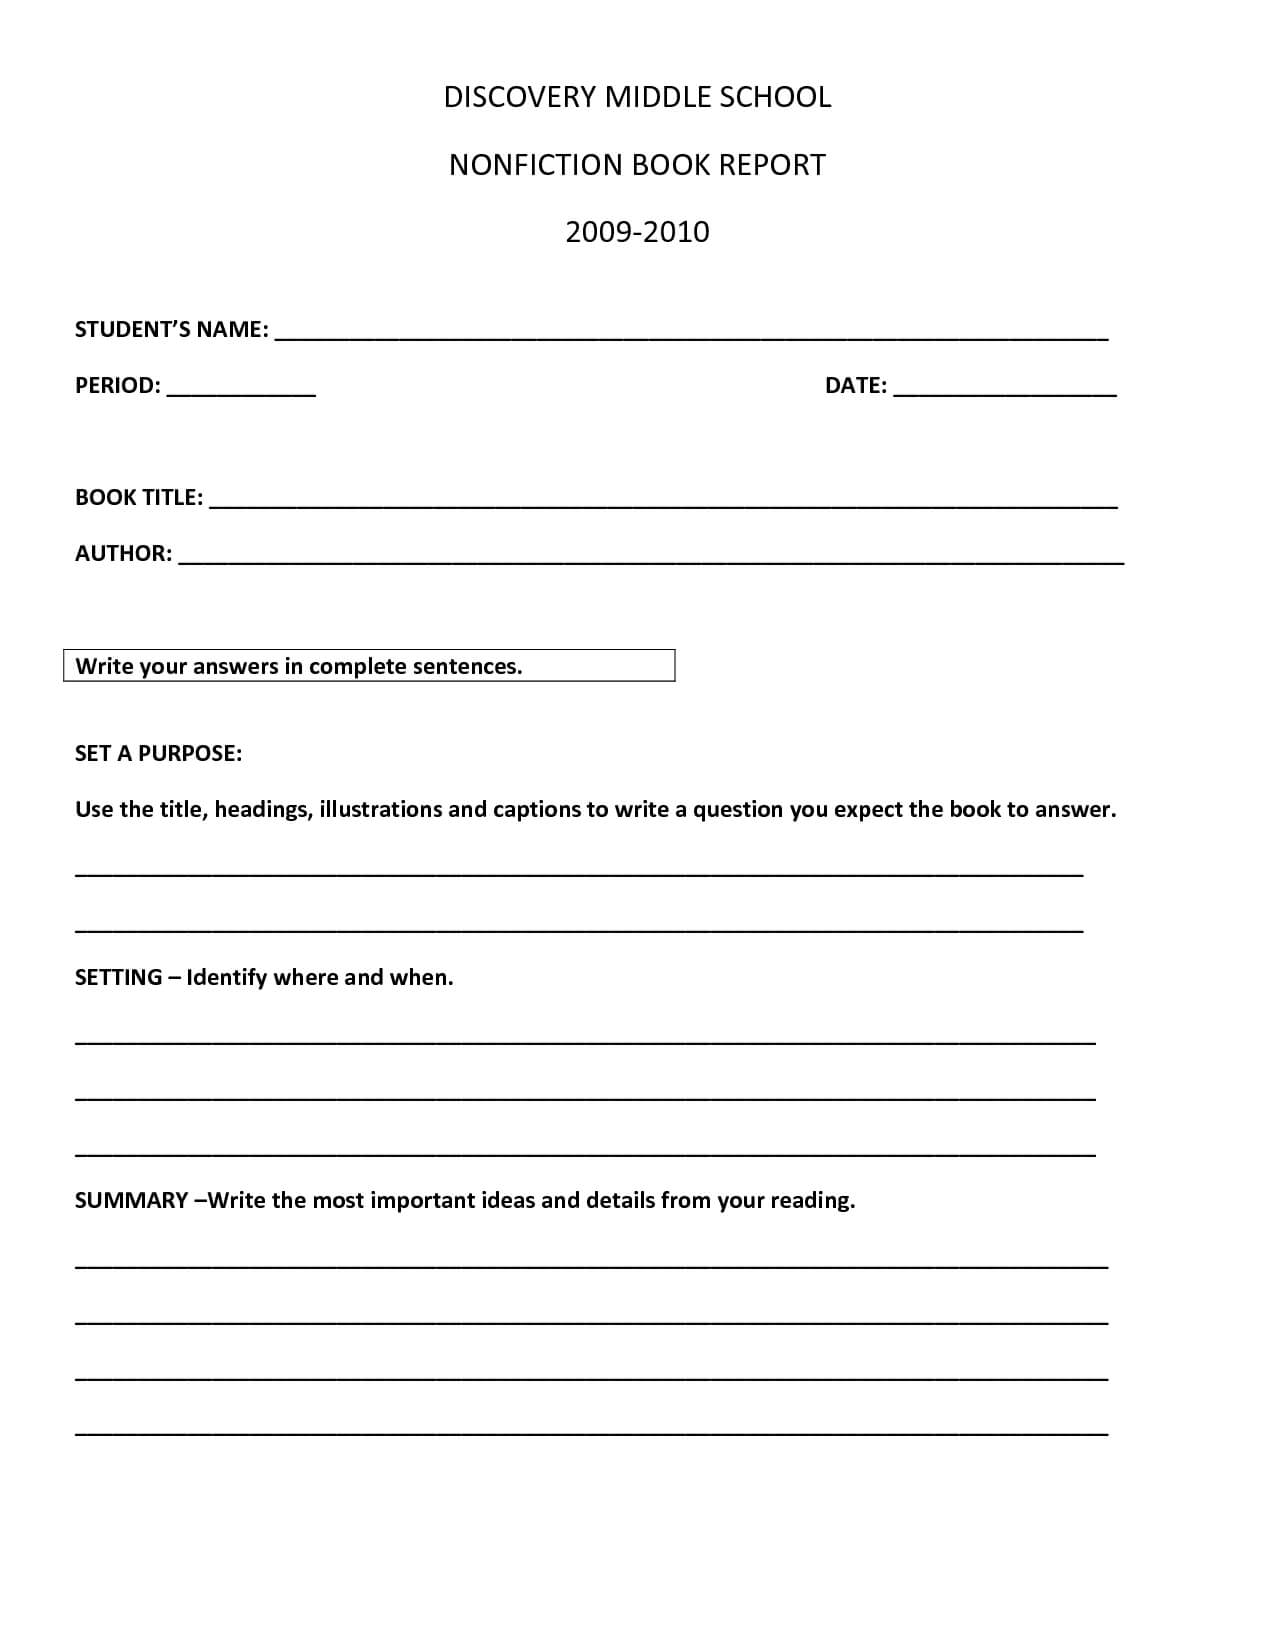 Book Report Template | Discovery Middle School Nonfiction Intended For Middle School Book Report Template